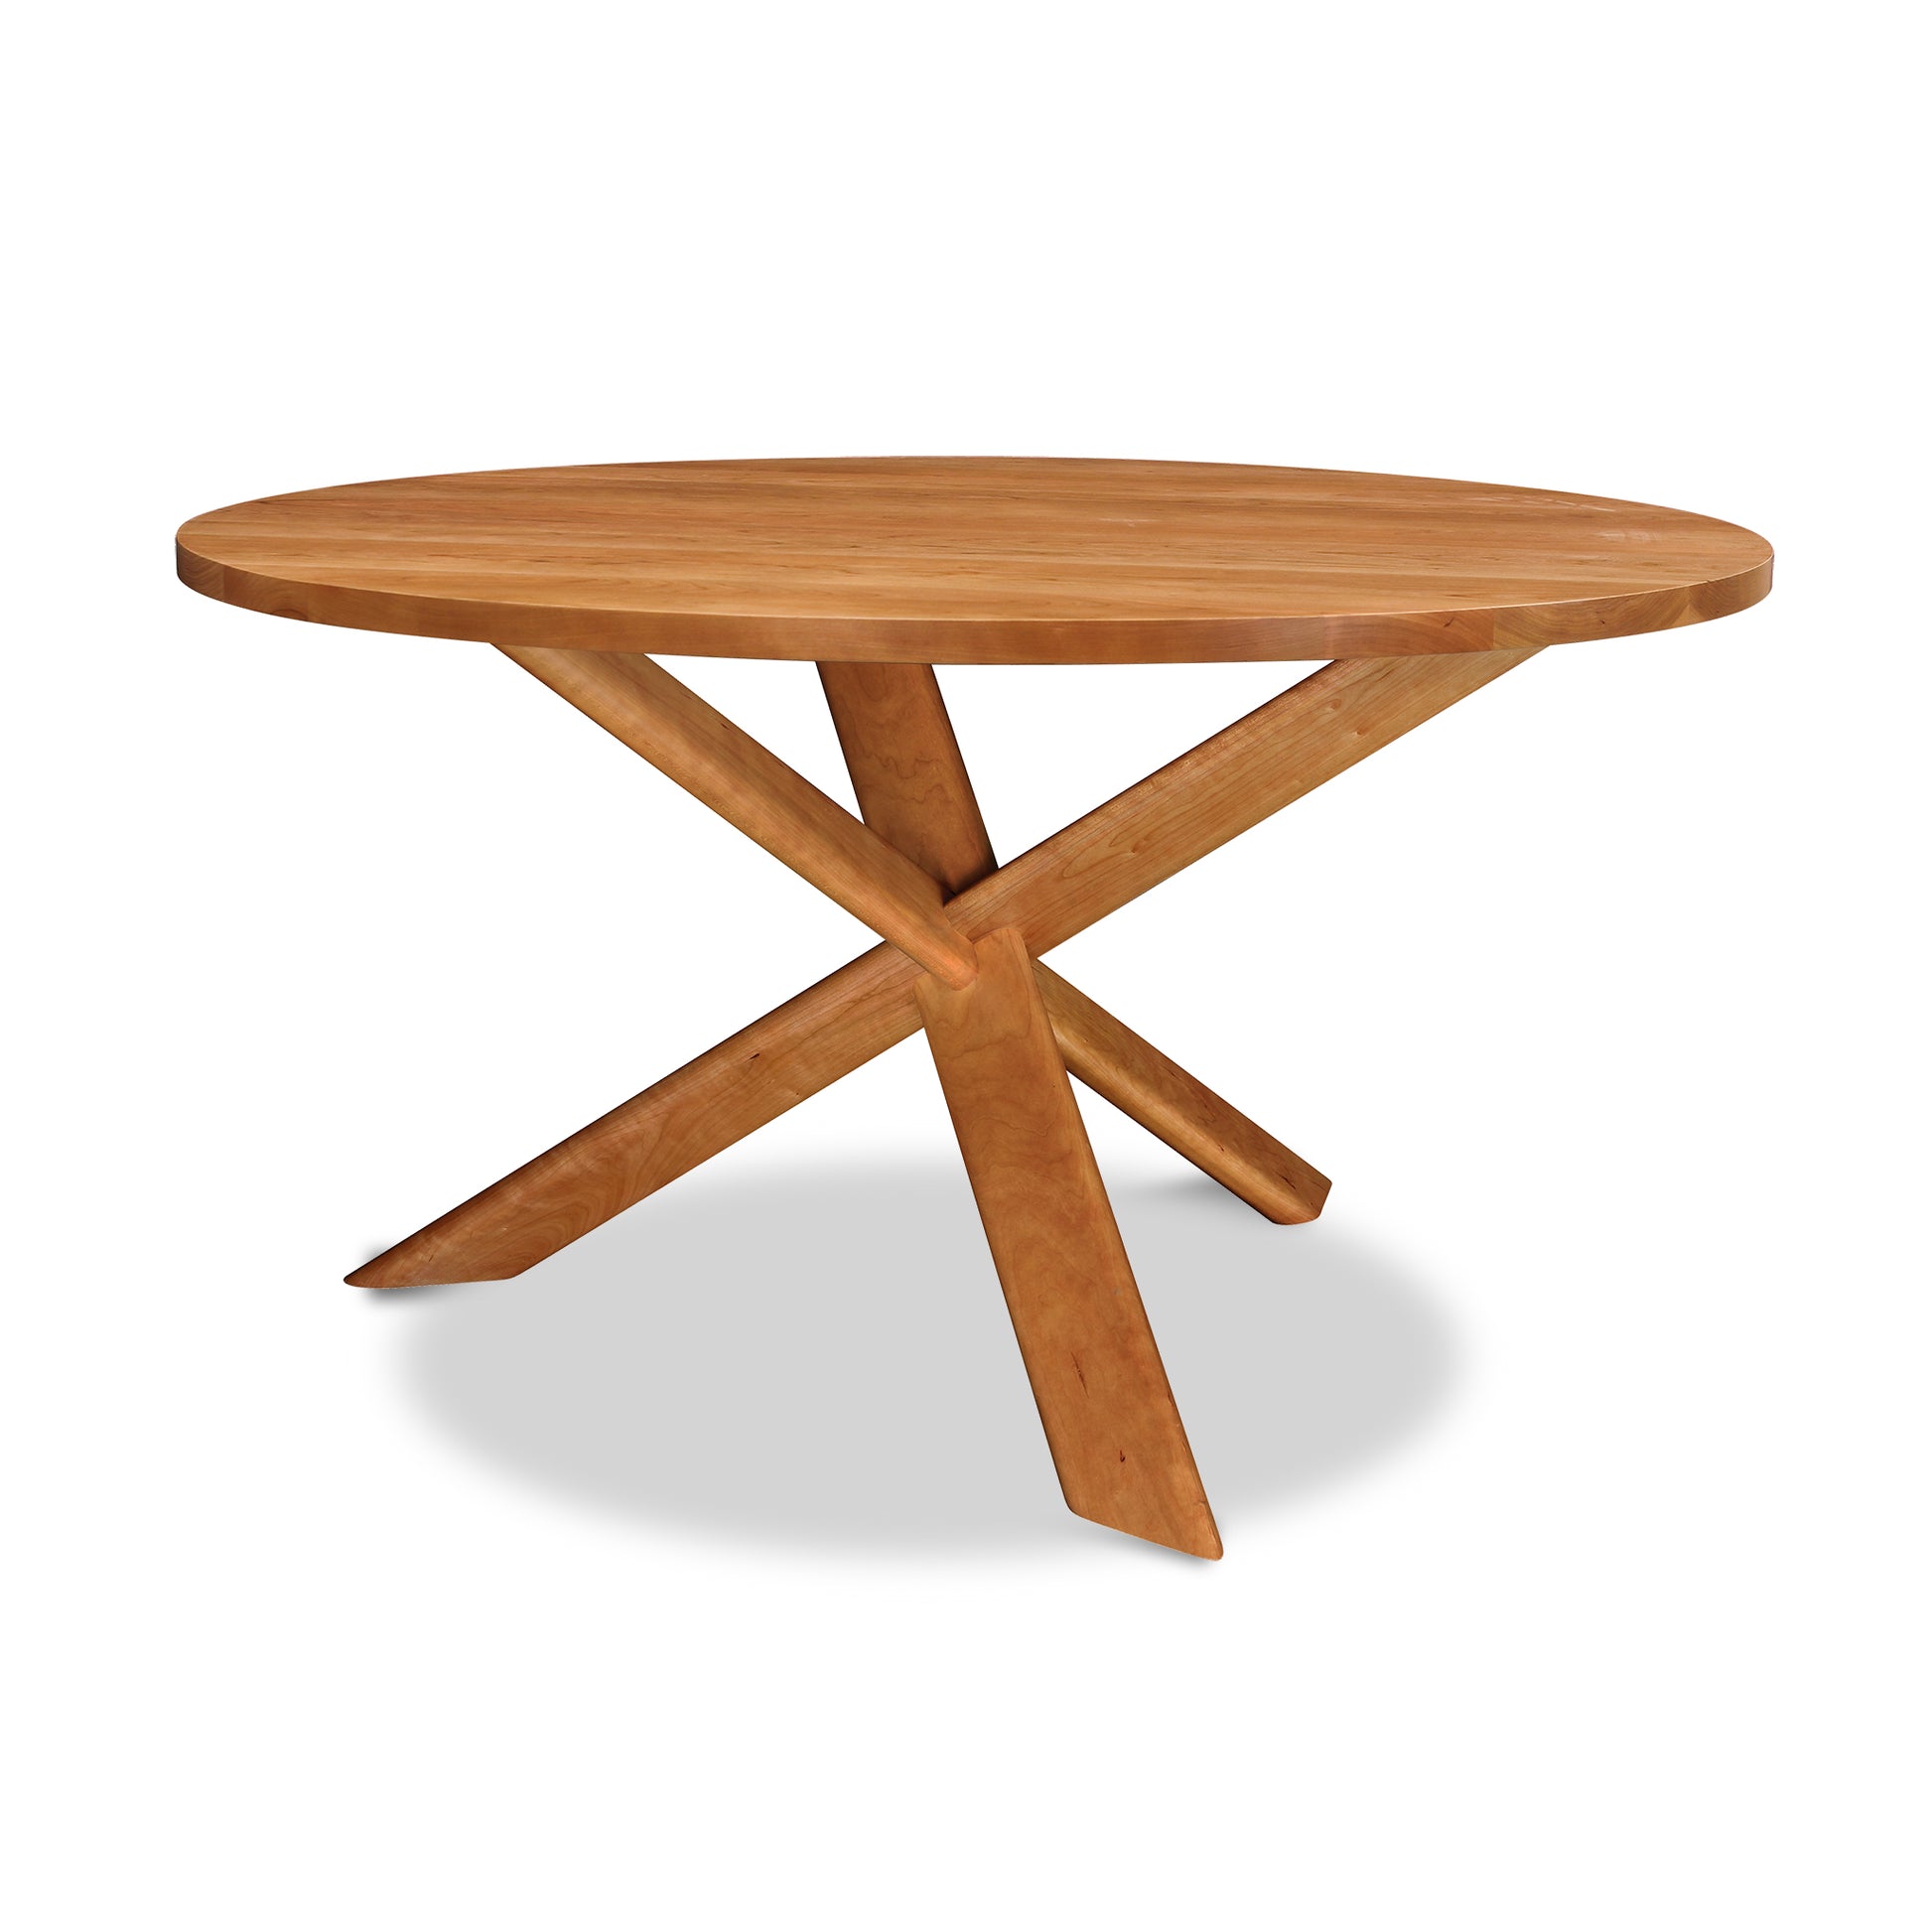 A Lyndon Furniture Junction Solid Top Table with crossed legs and a natural finish.